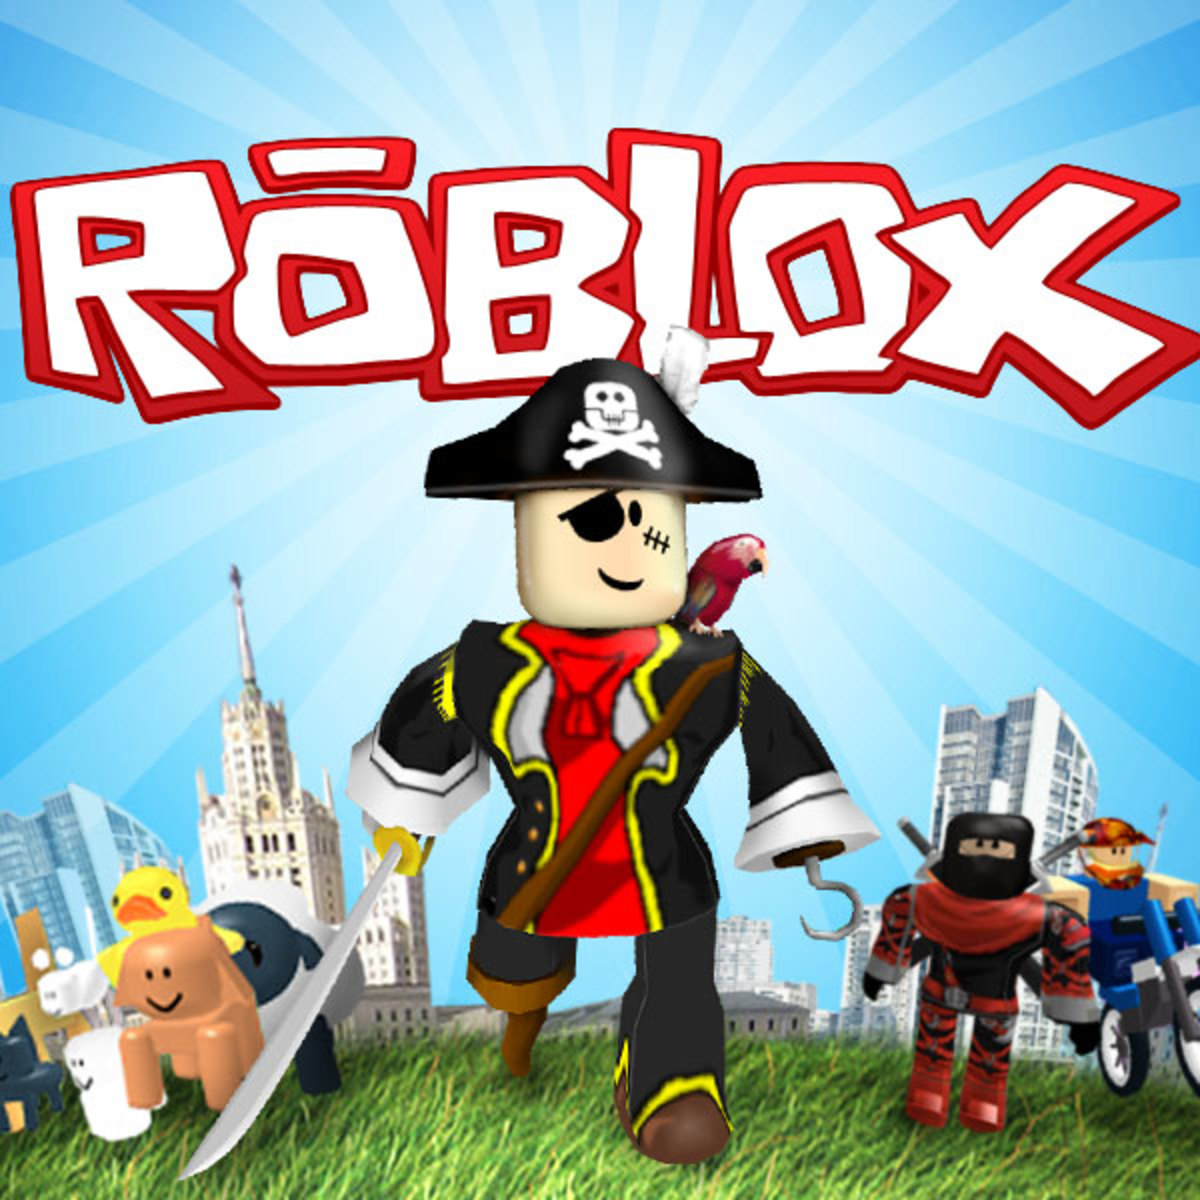 18 Games Like Minecraft Free And Paid Fun Sandbox Building - roblox unlimited robux with a twist knight games try again